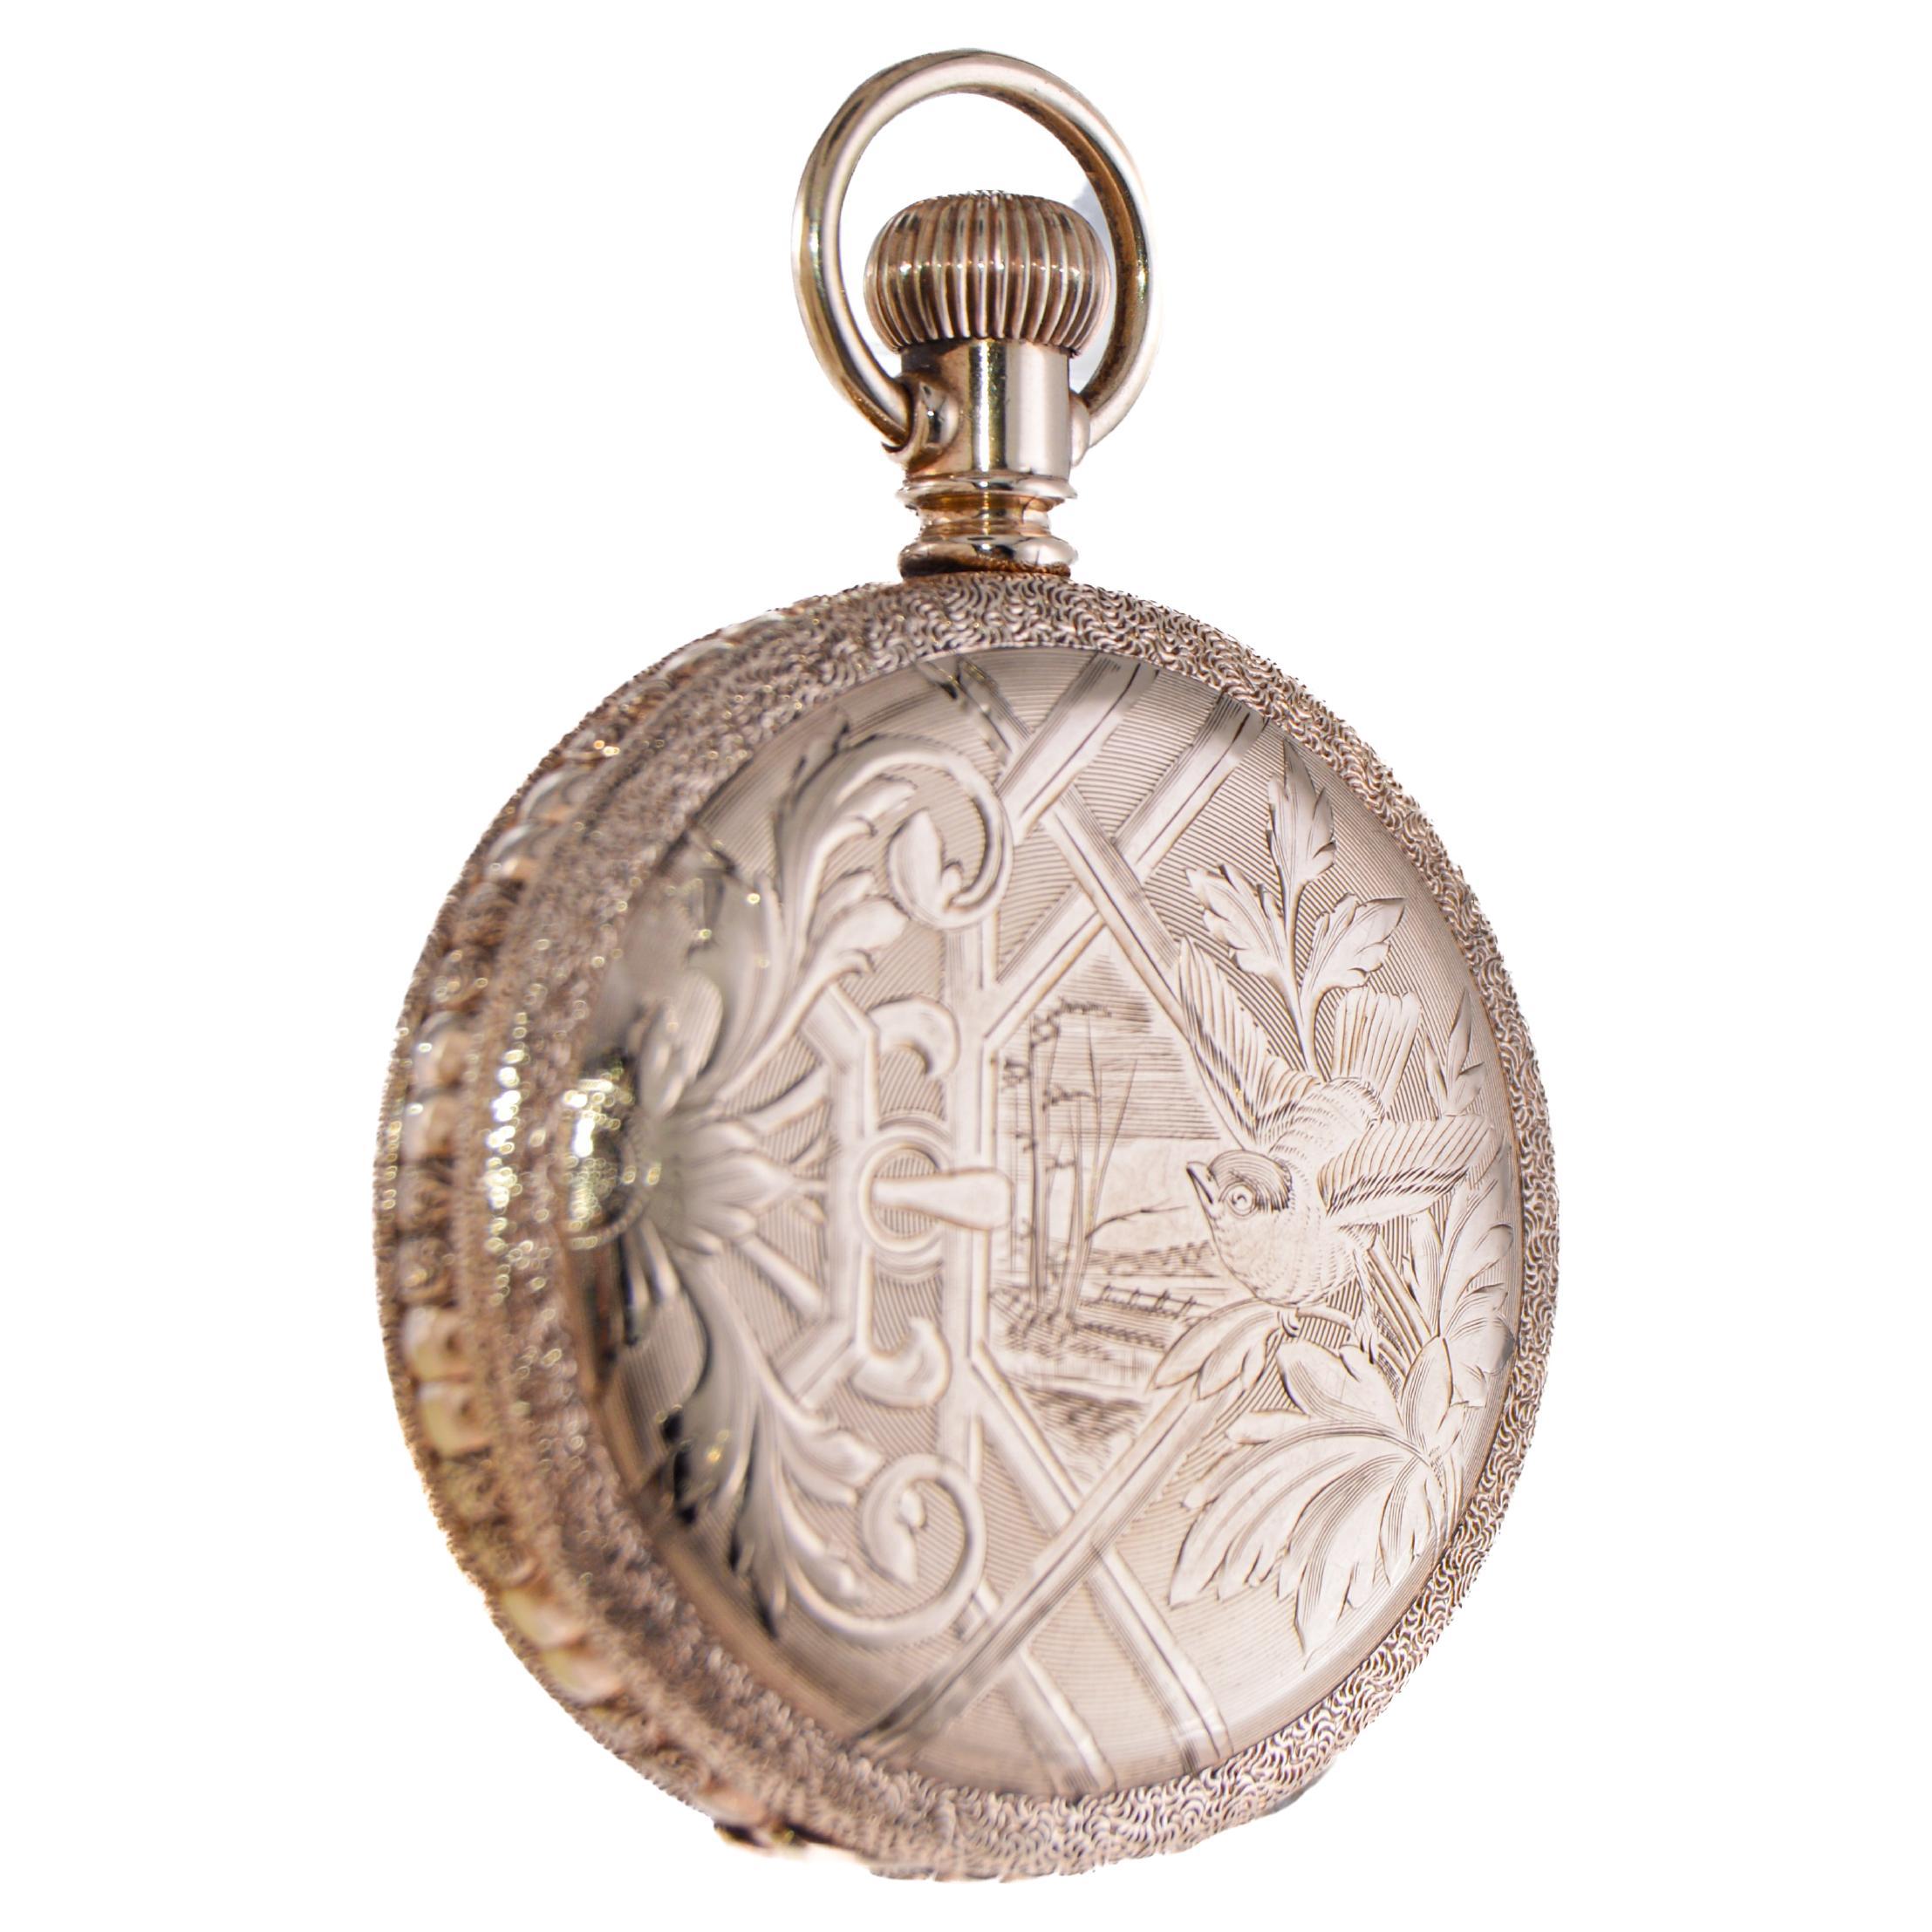 Elgin Gold Filled Pocket Watch From 1891 with Original Kiln Fired Enamel Dial  2